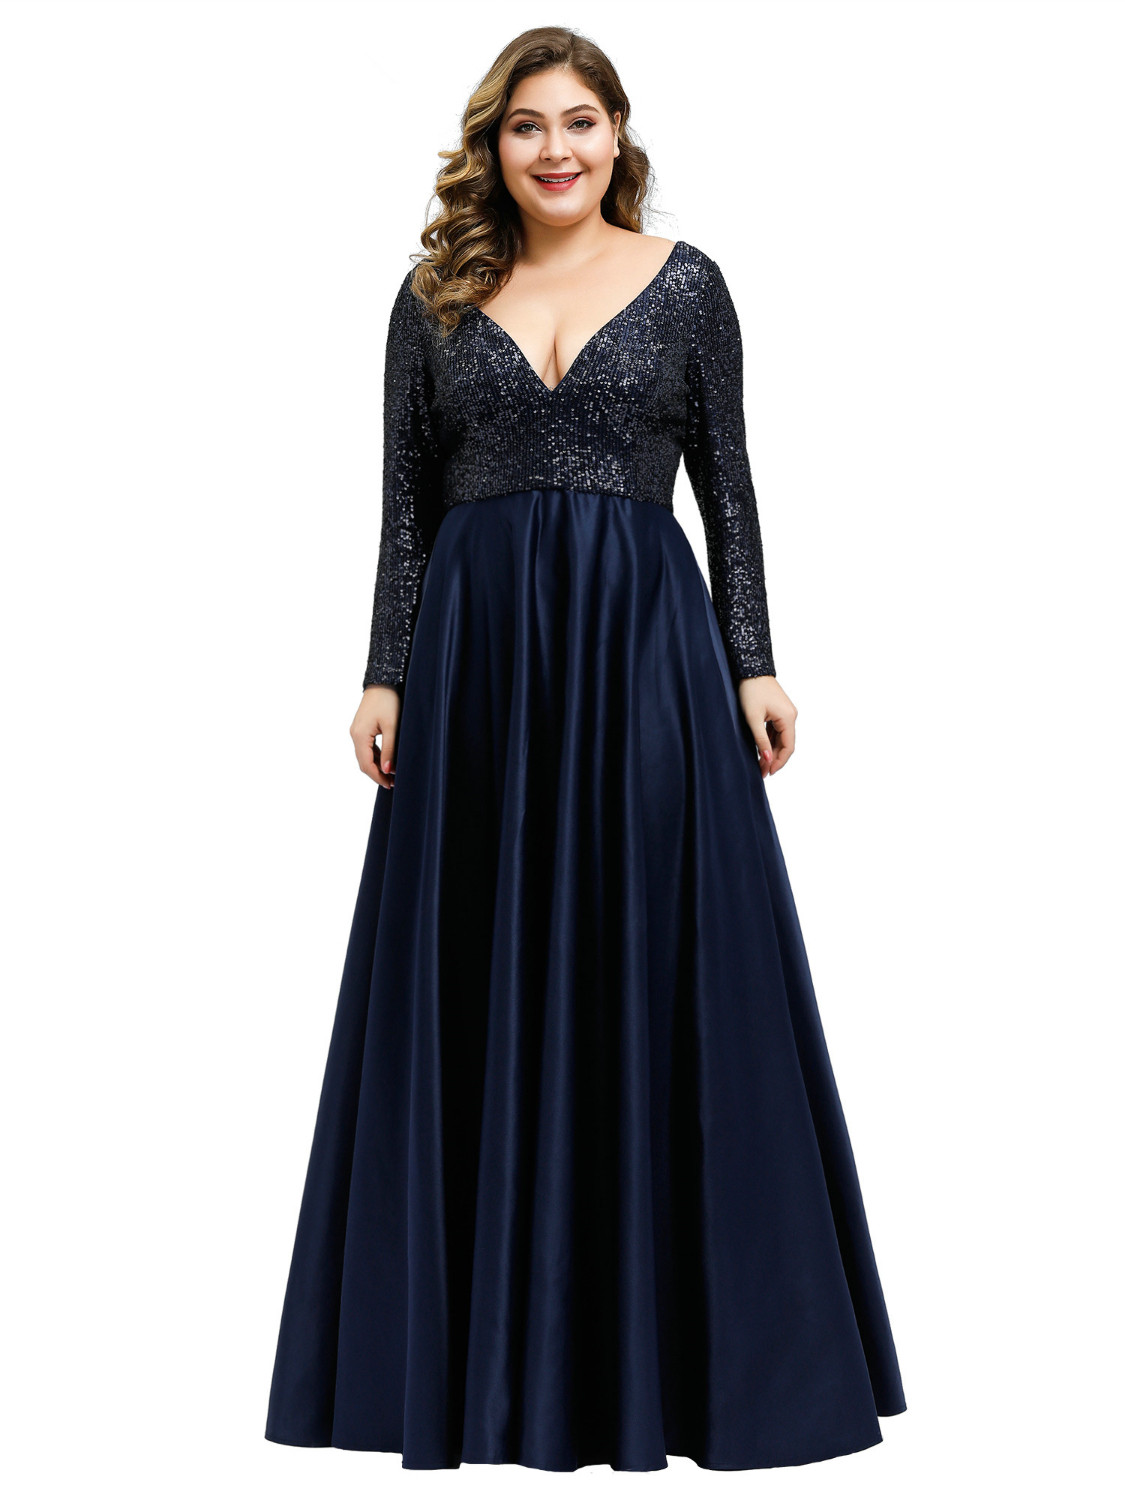 Gorgeous Long Sleeve Sequins Prom Dress Navy V-Neck Plus Size Evening Gowns